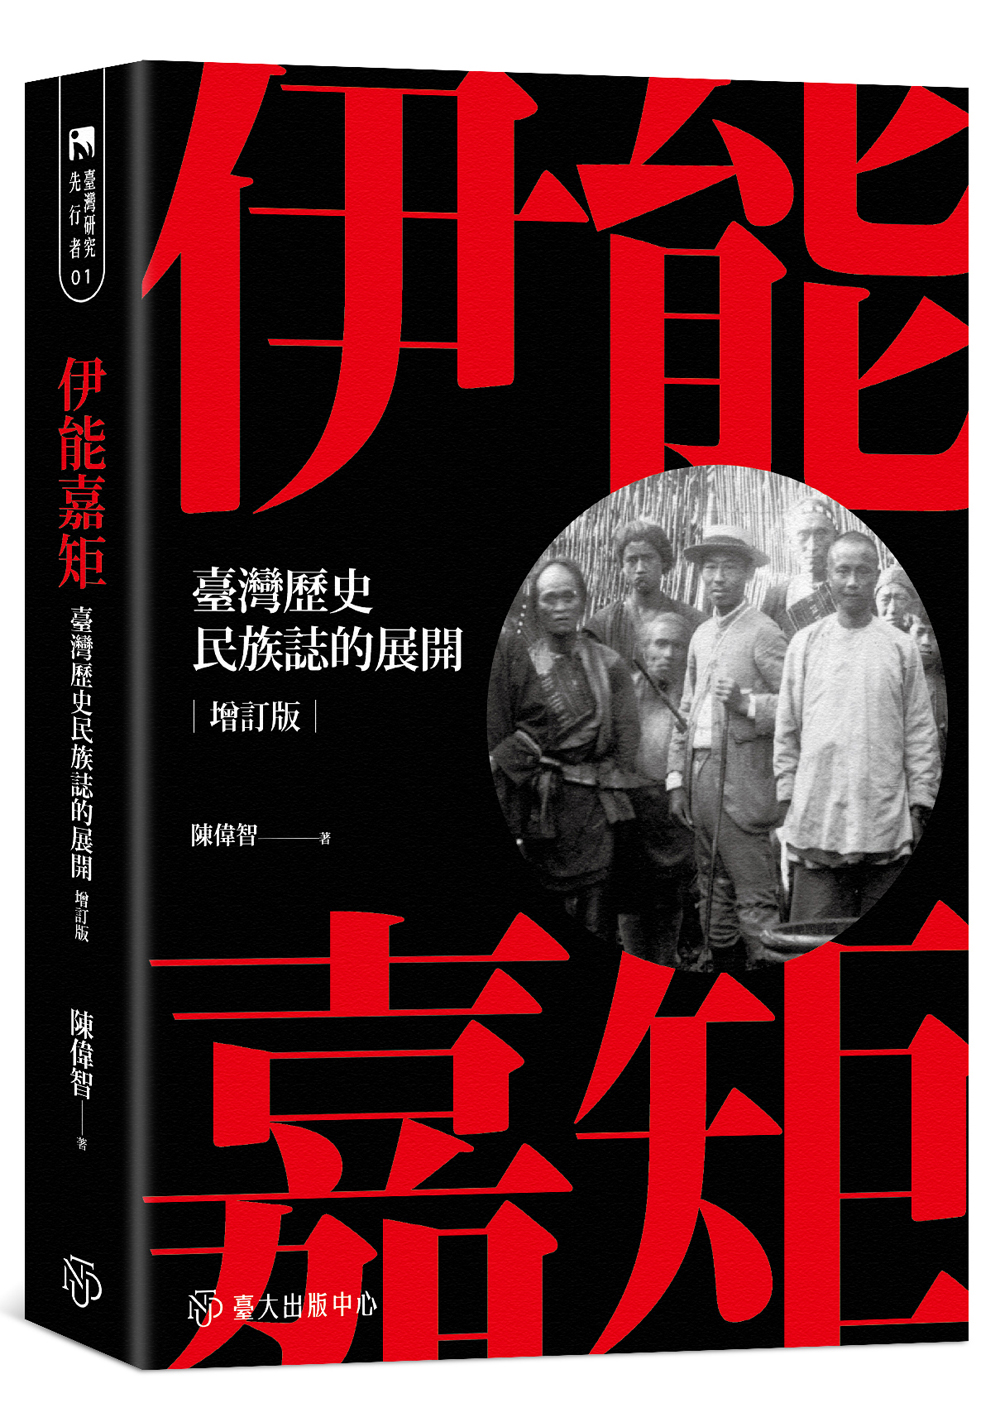 Ino Kanori and the Emergence of Historical Ethnography in Taiwan (Extended edition)